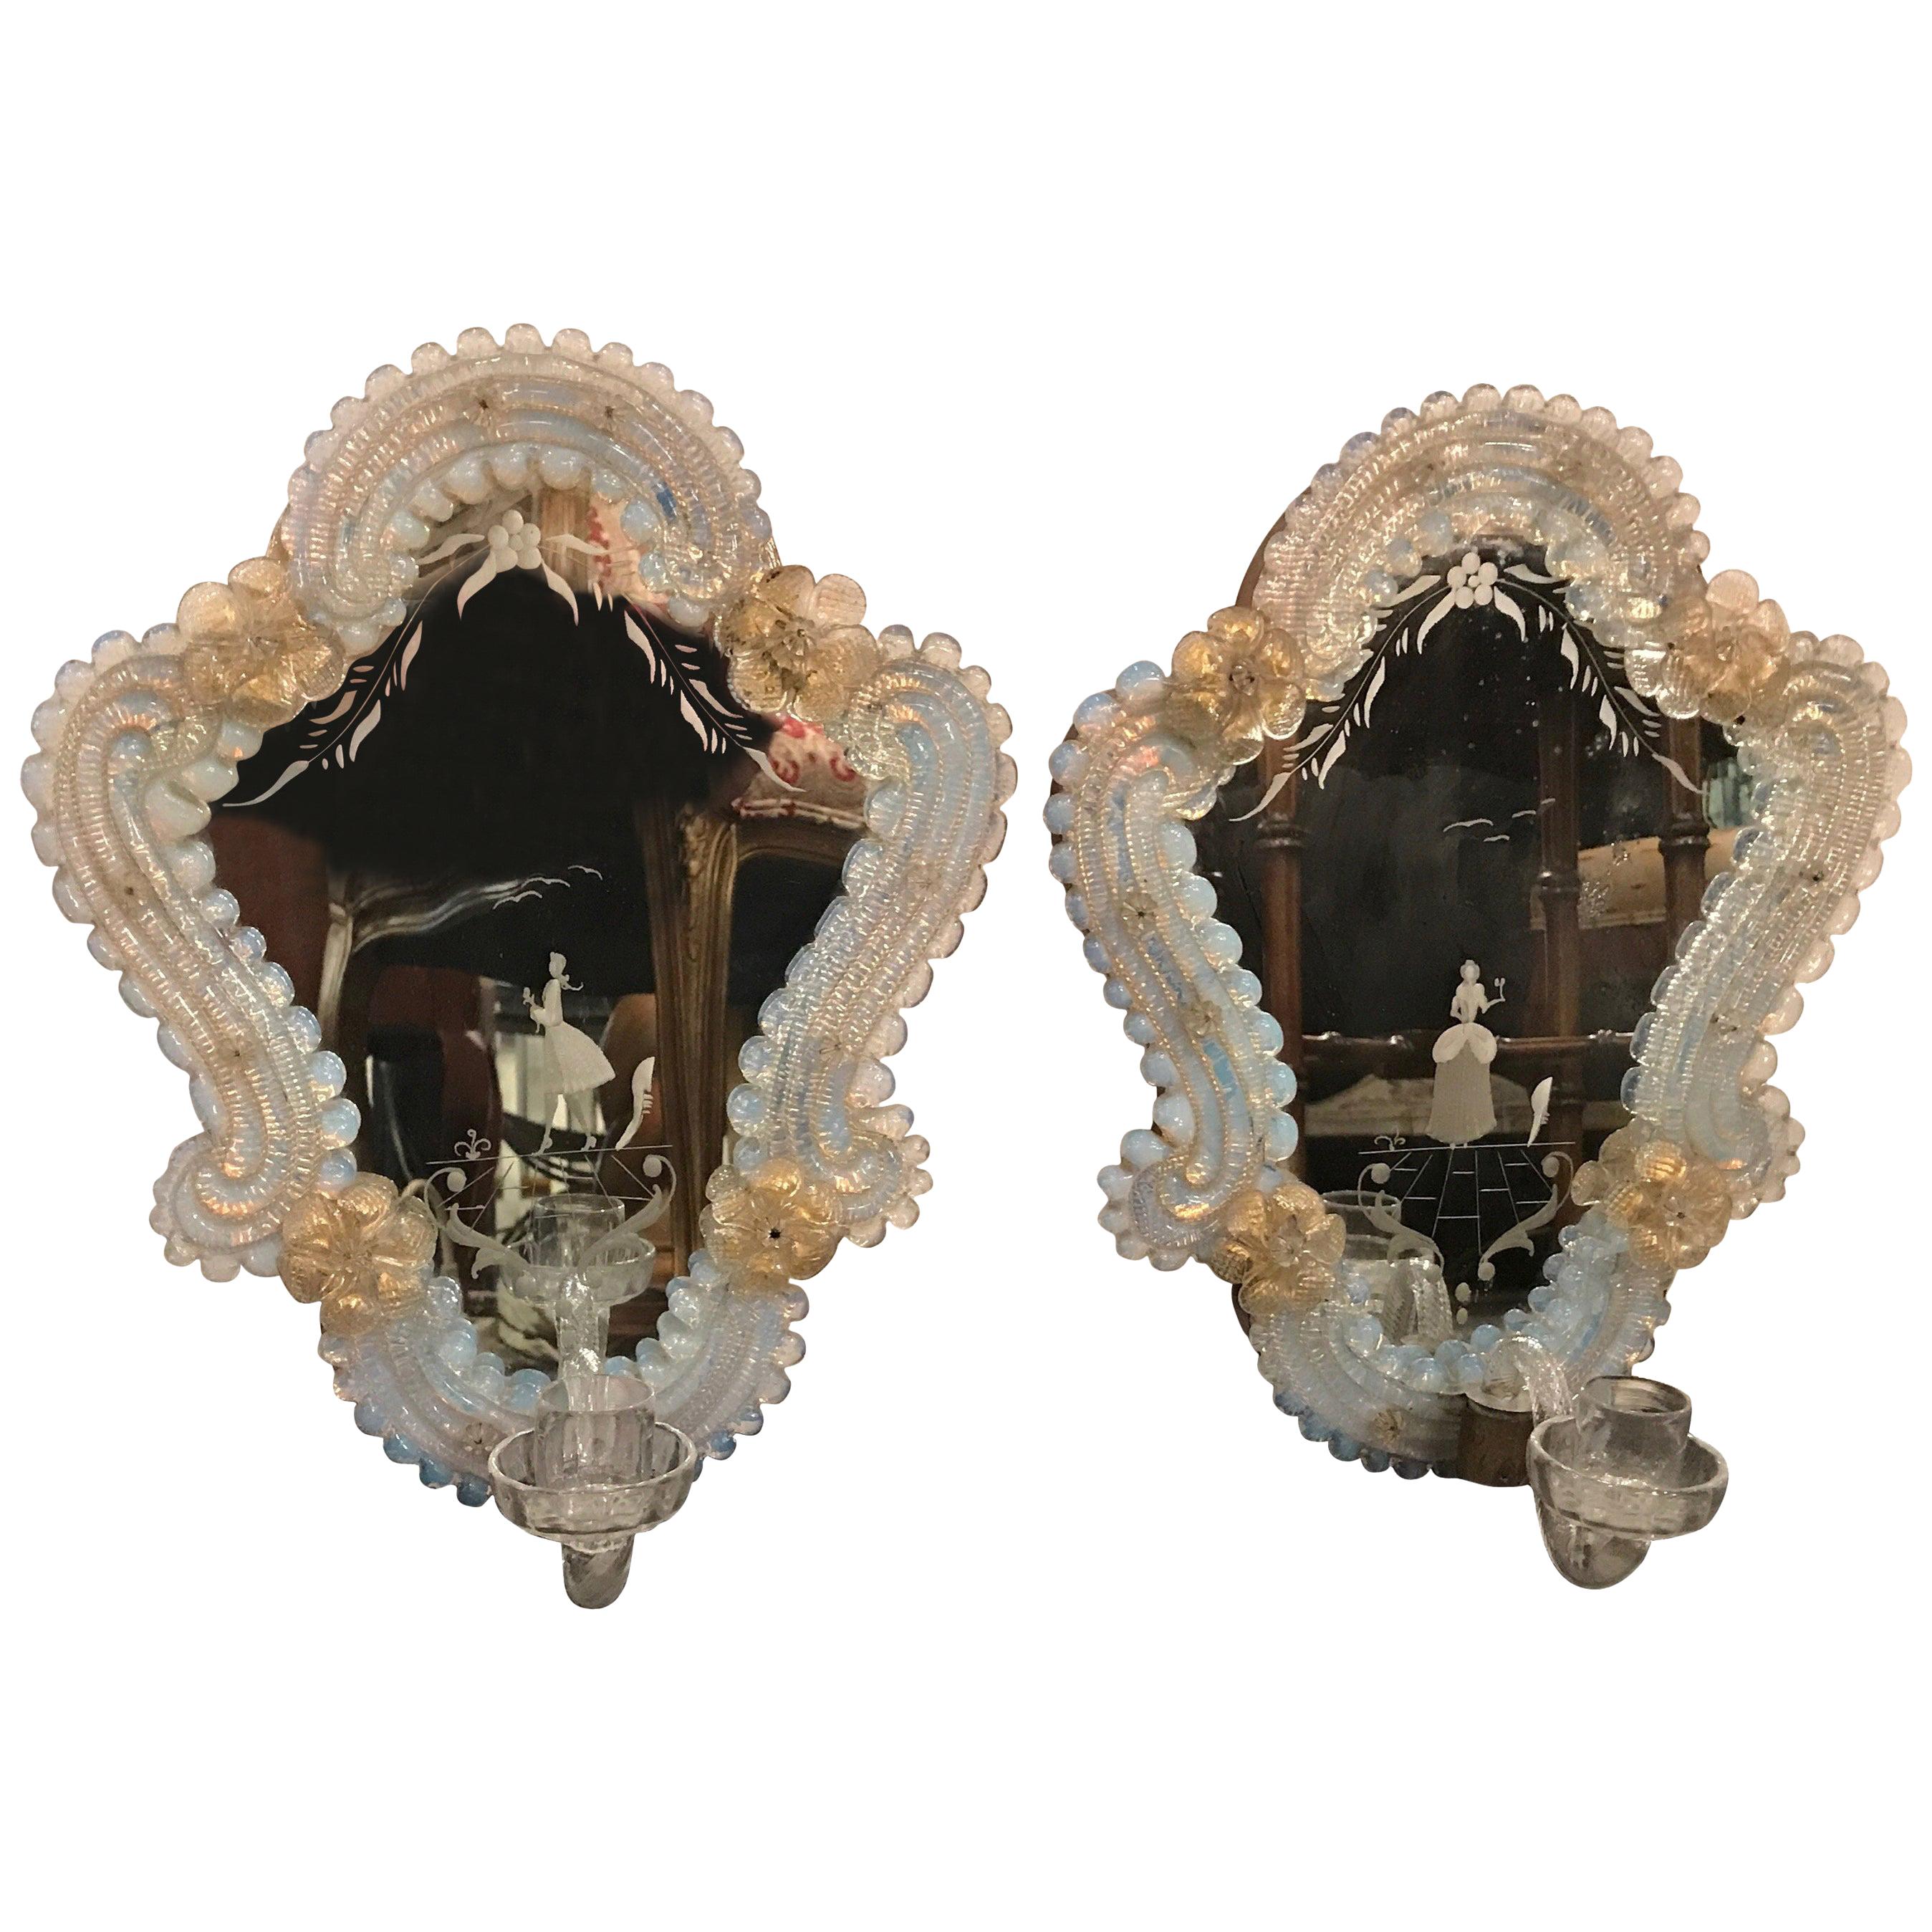 Pair of Venetian Glass and Etched Mirrored Candle Sconces, 1920s